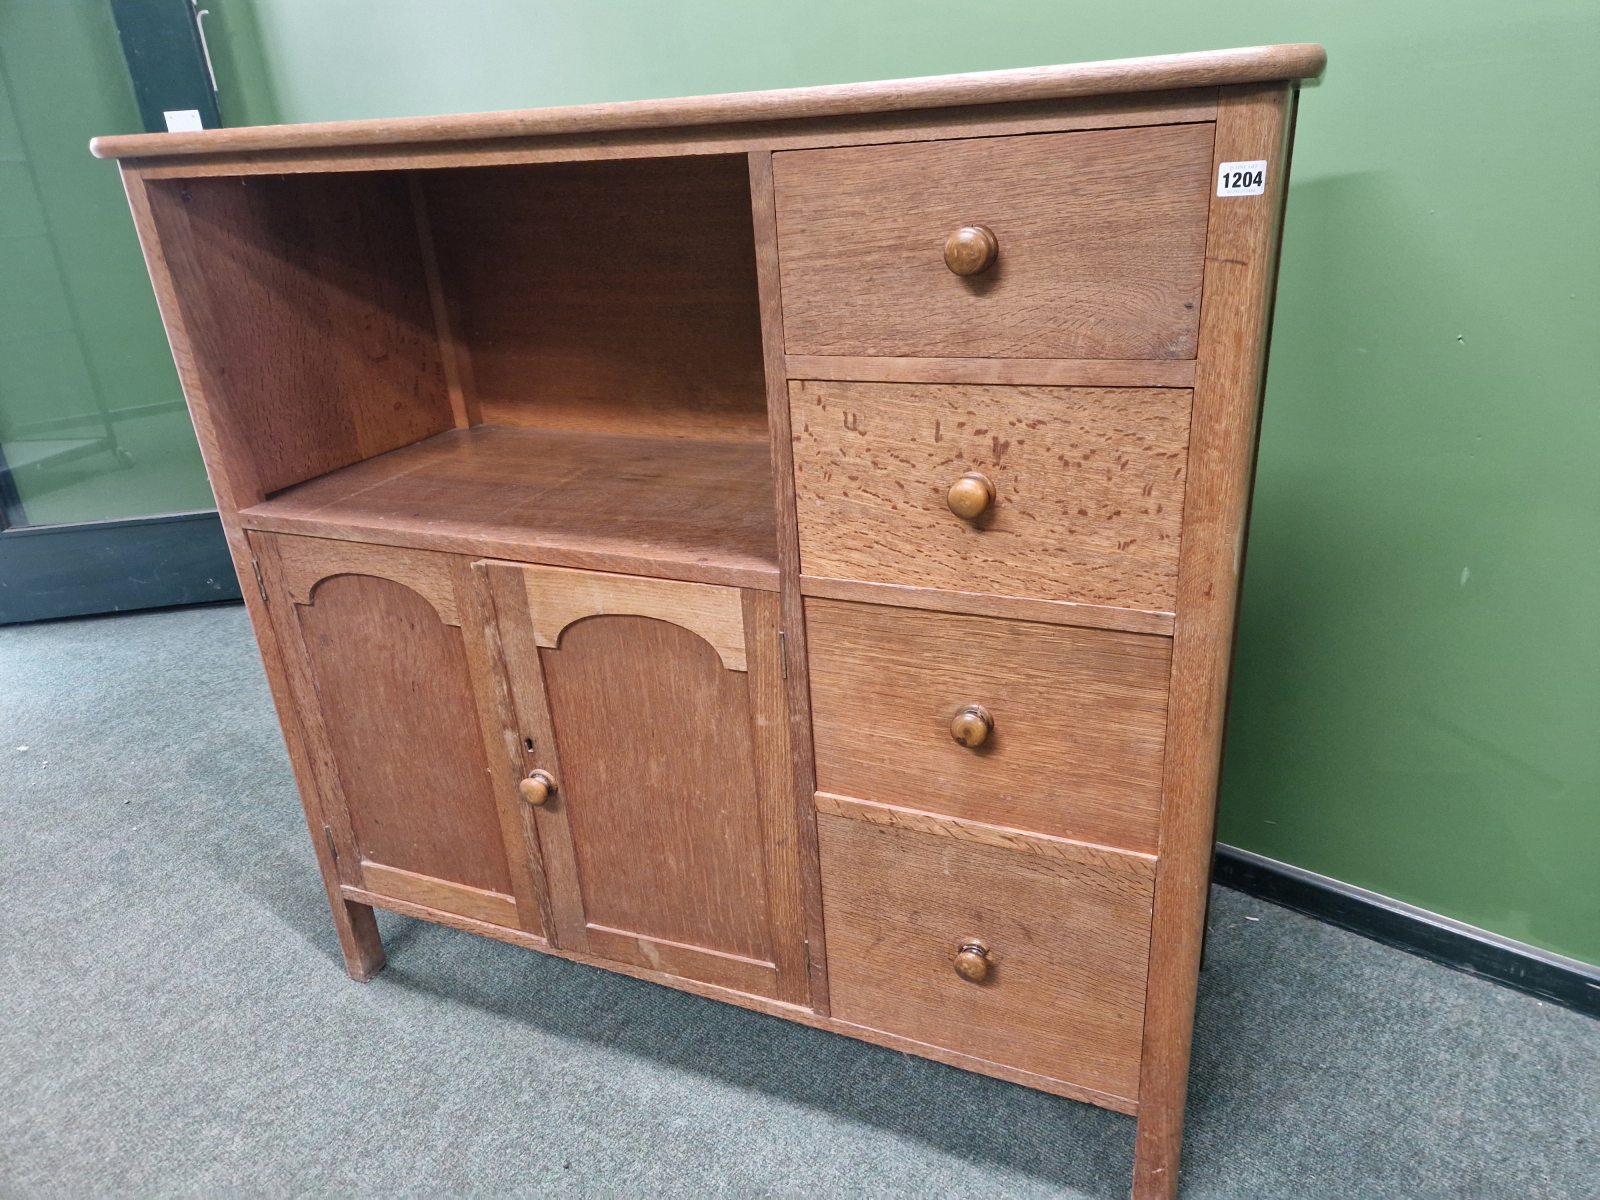 AN ARTS AND CRAFTS STYLE OAK SIDE CABINET IN THE MANNER OF HEALS.